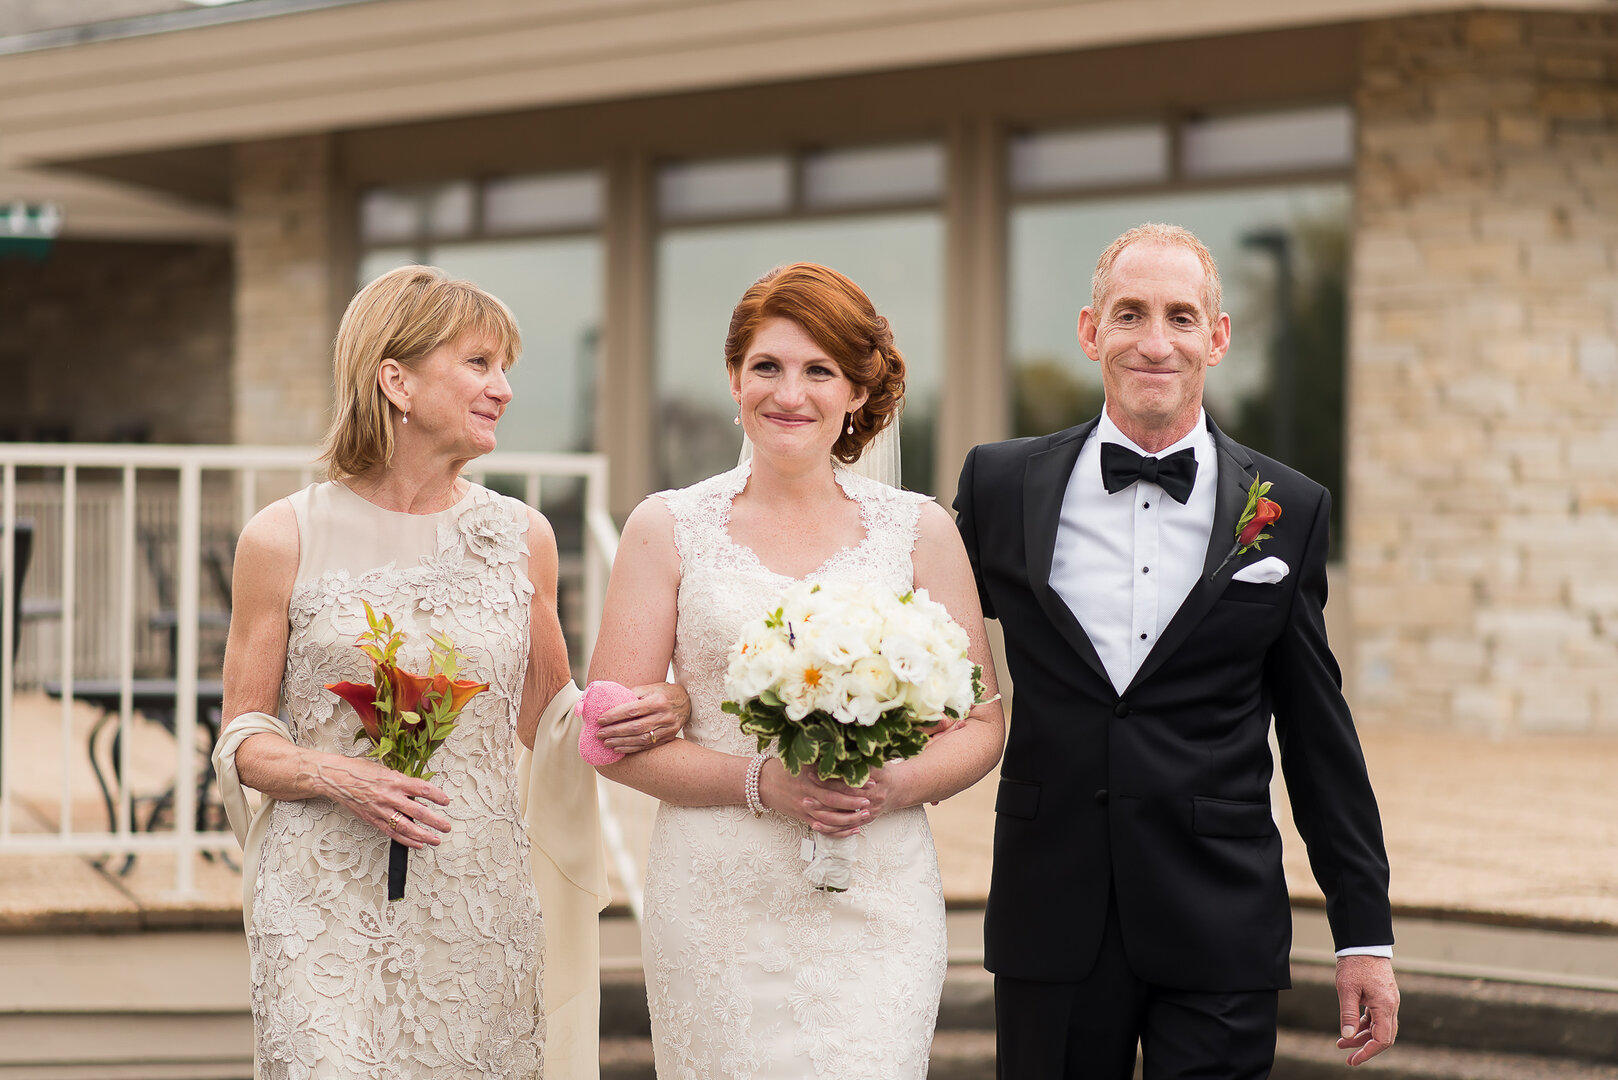 Fall Inspired Brunch Wedding at Ivanhoe Club featured on CHI thee WED